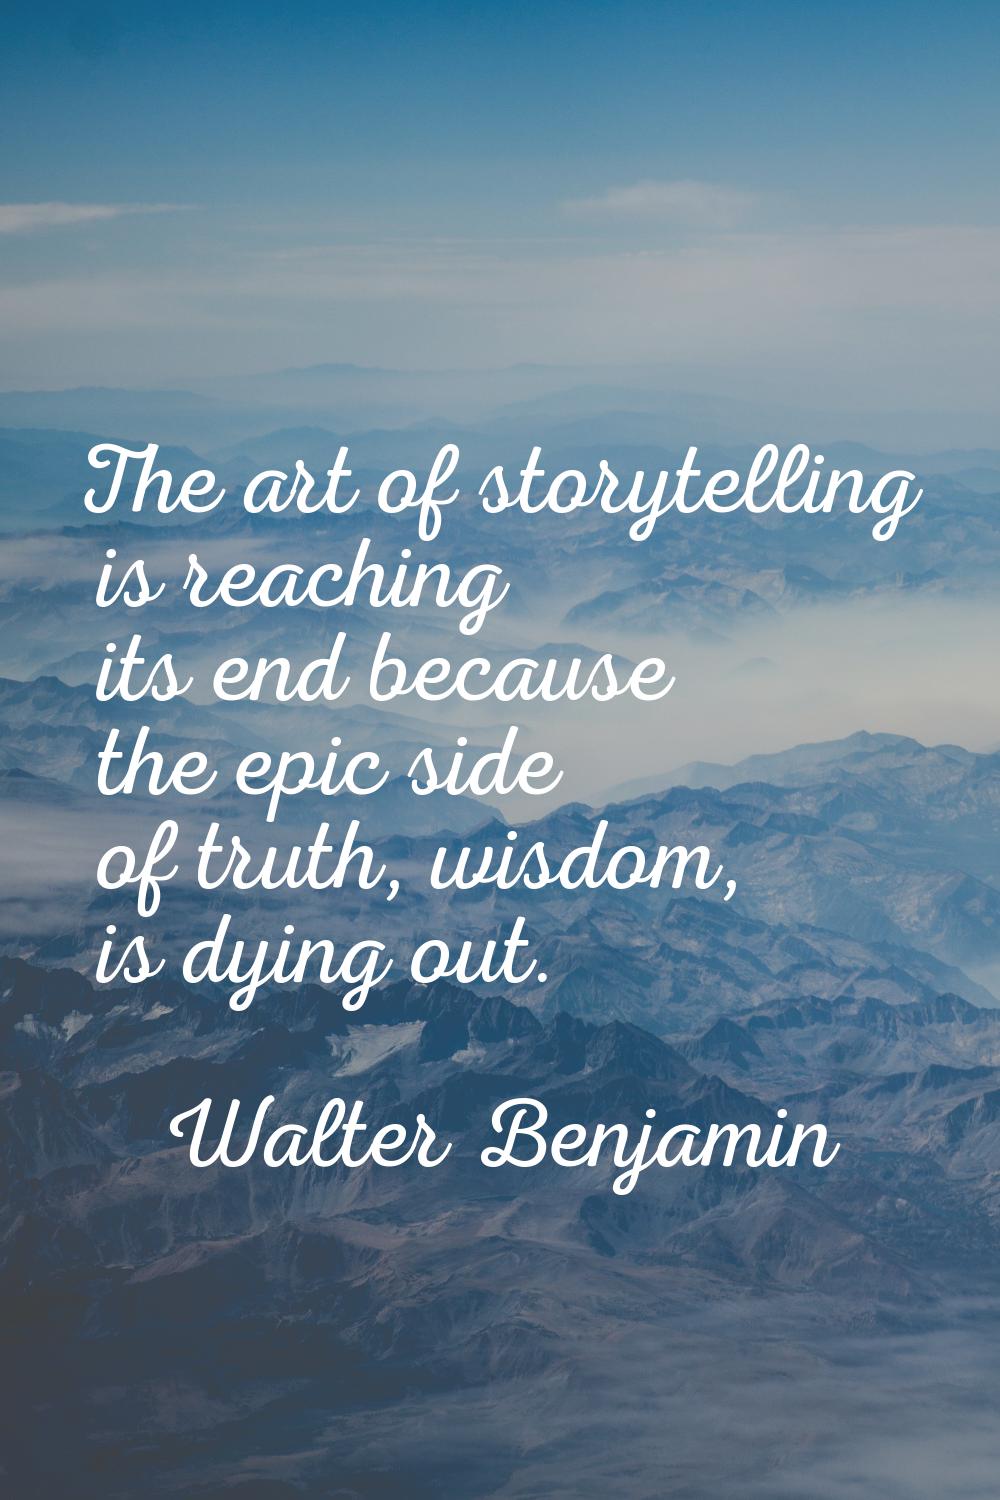 The art of storytelling is reaching its end because the epic side of truth, wisdom, is dying out.